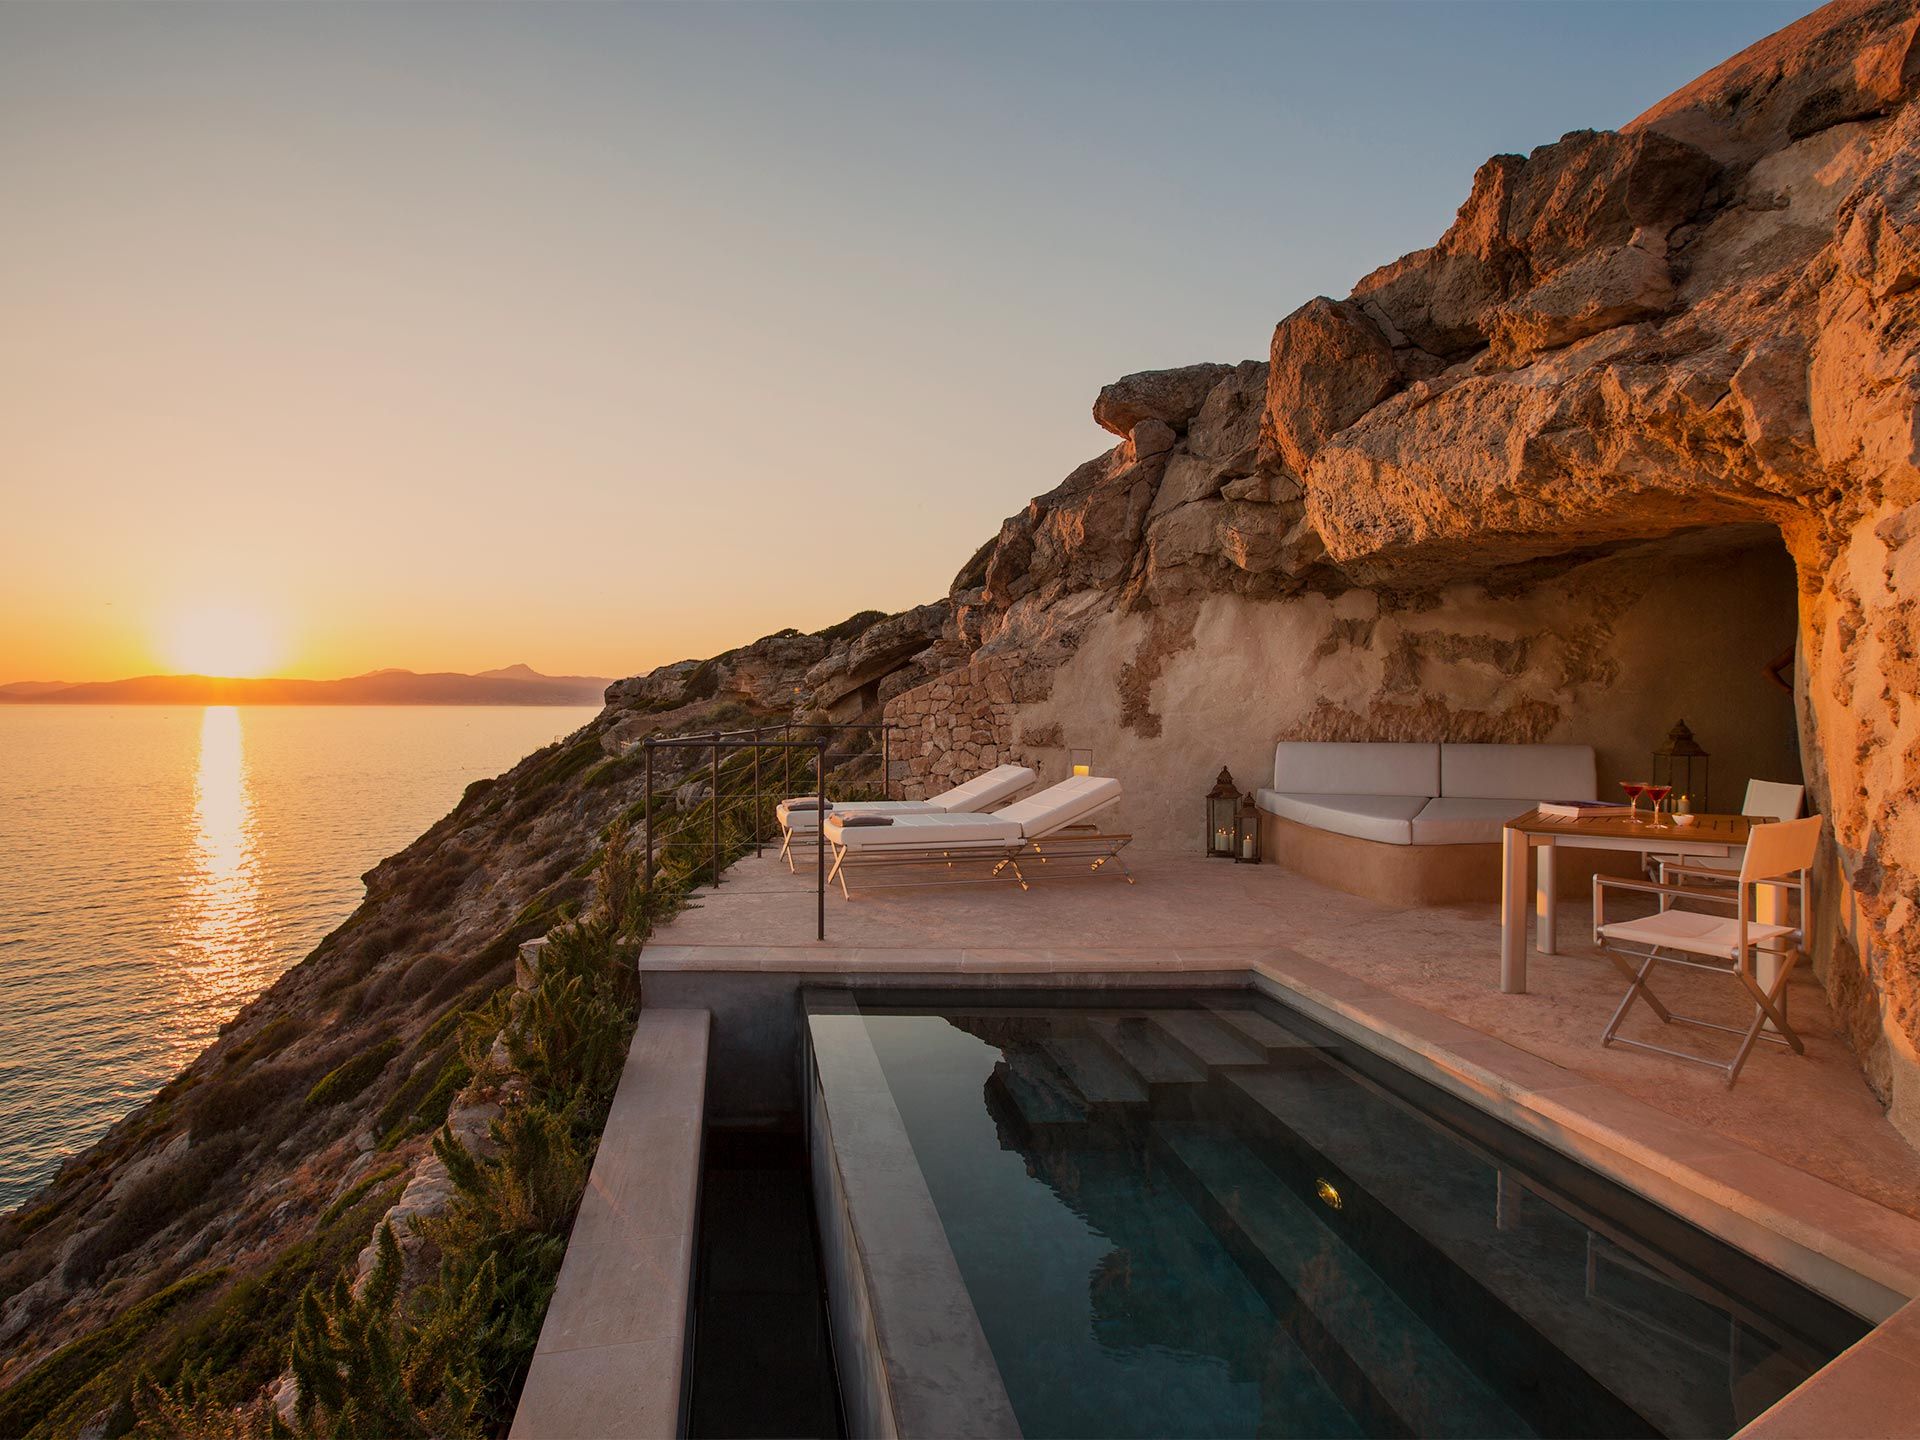 The 7 Most Romantic Getaways for Valentine’s Day